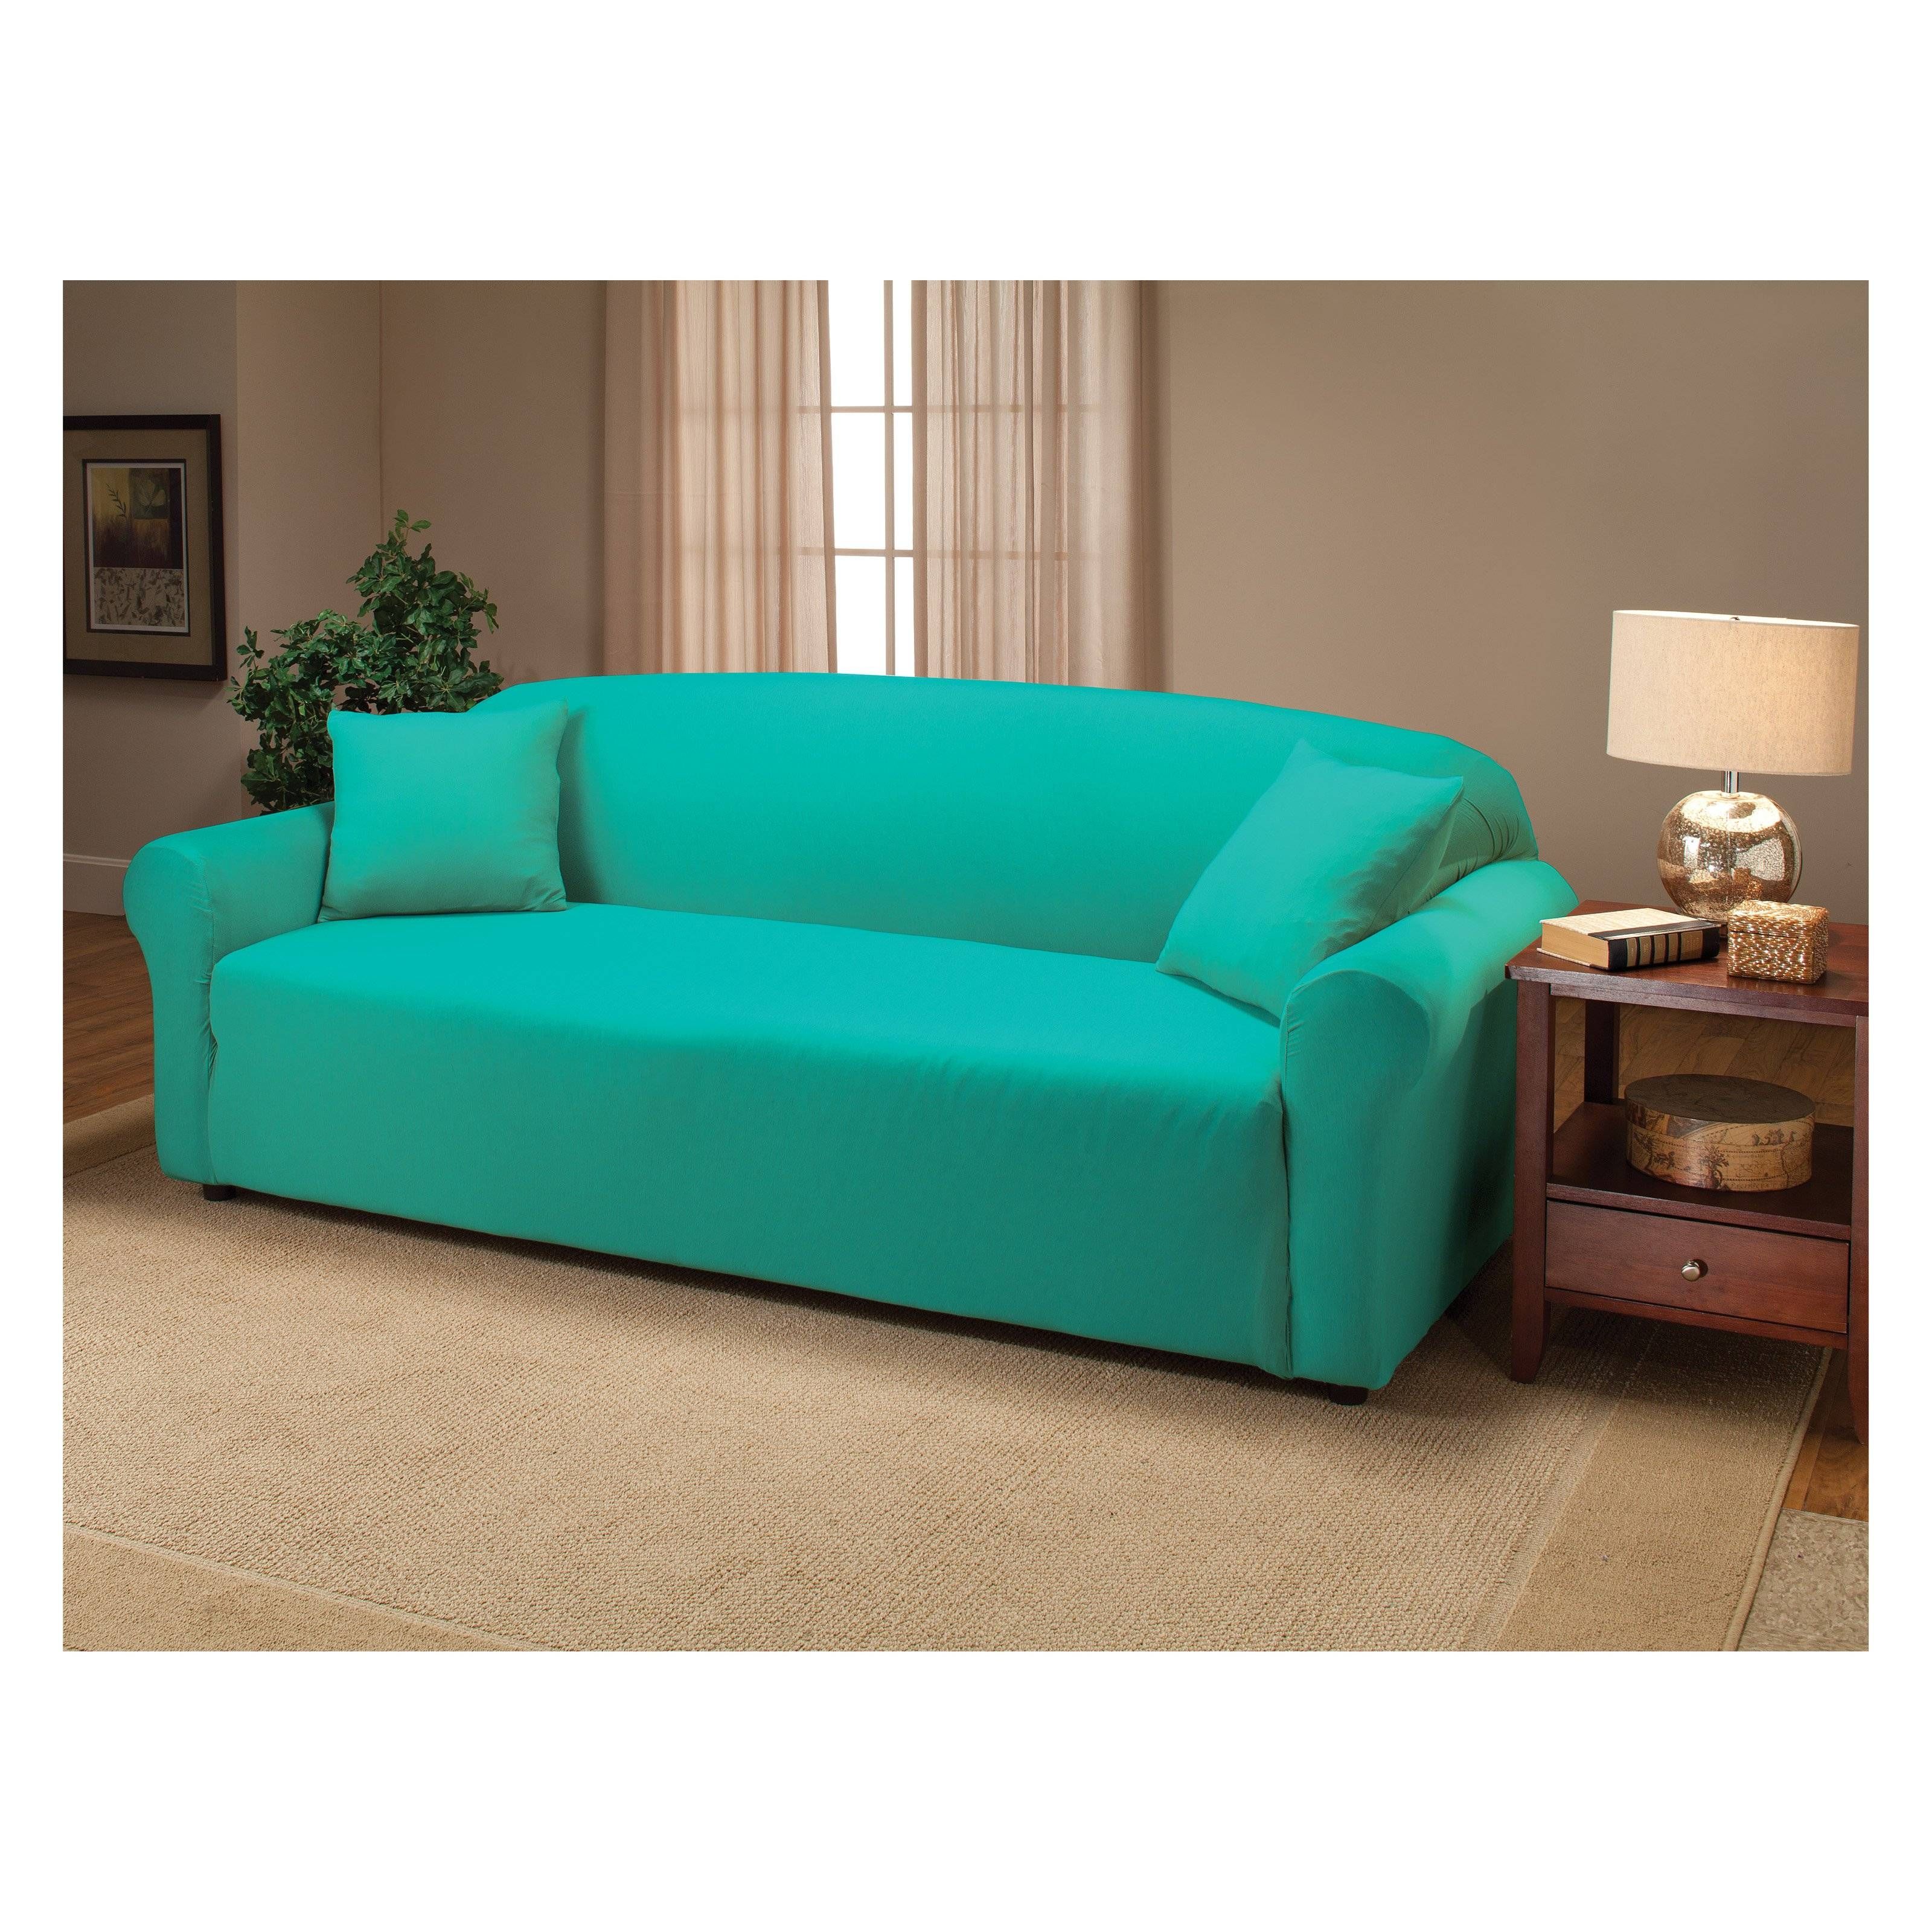 Maytex Stretch Pixel Two Piece Sofa Slipcover | Hayneedle Regarding Teal Sofa Slipcovers (View 1 of 30)